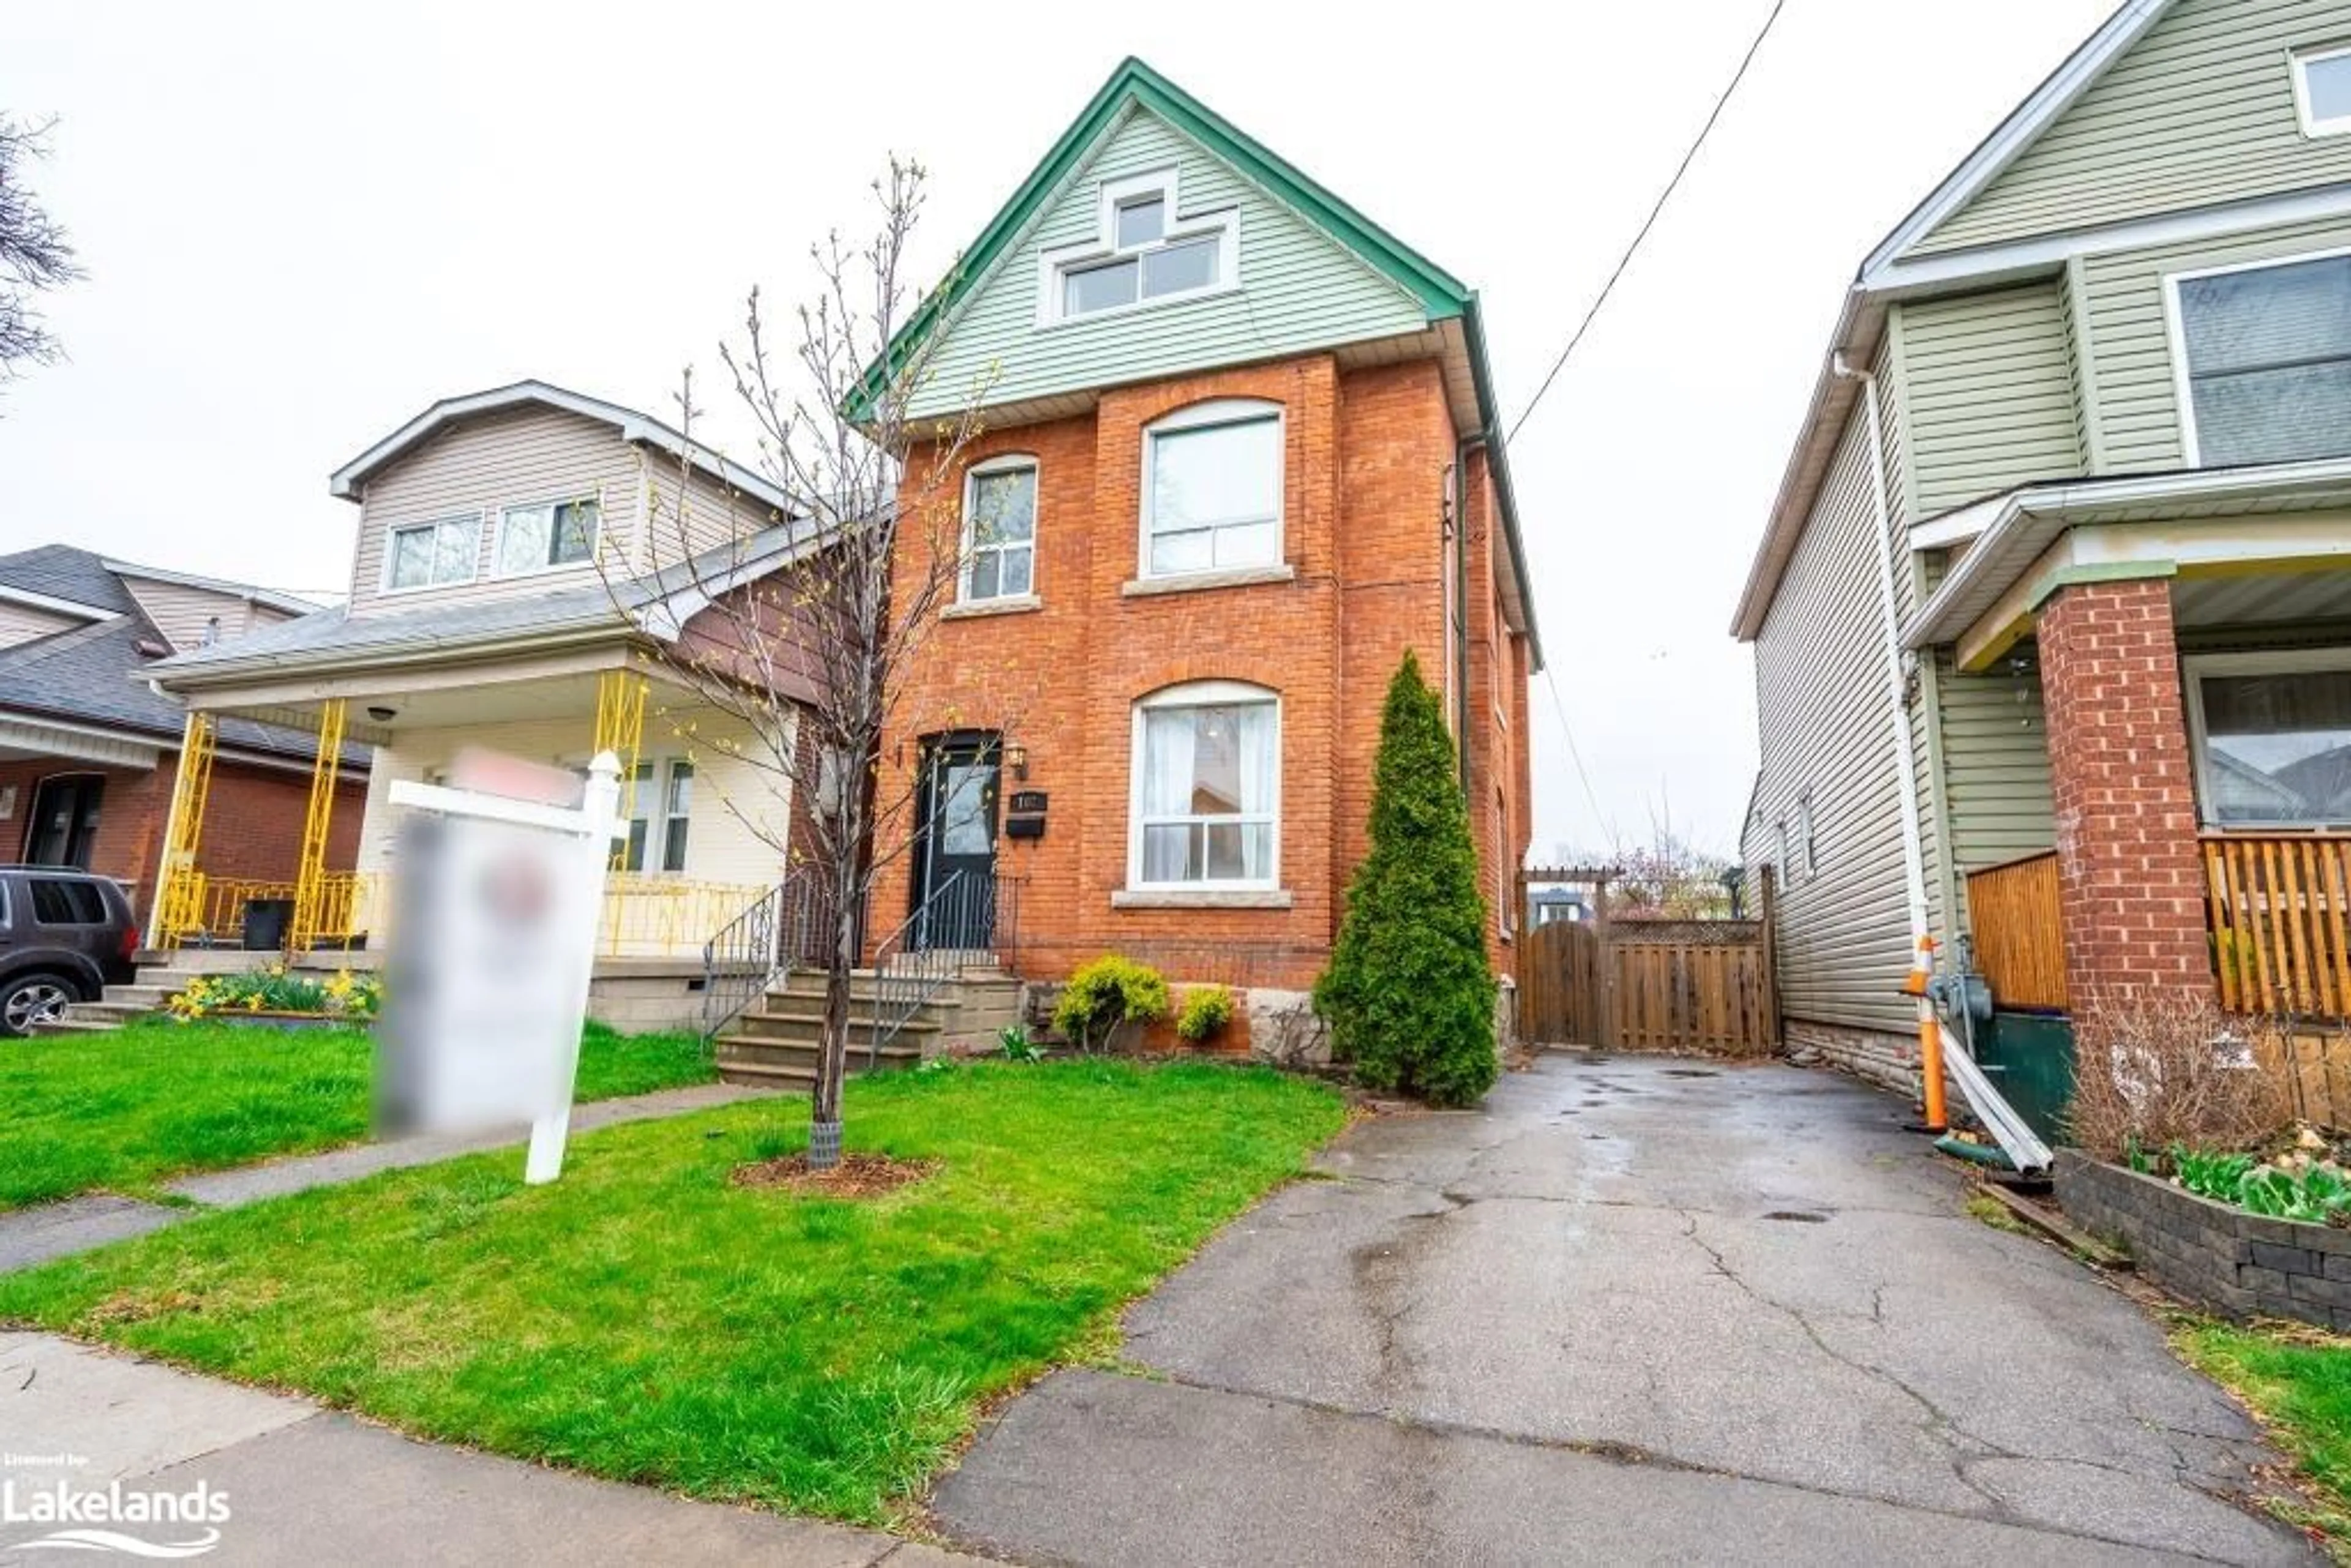 Frontside or backside of a home for 162 Avondale St, Hamilton Ontario L8L 7C2